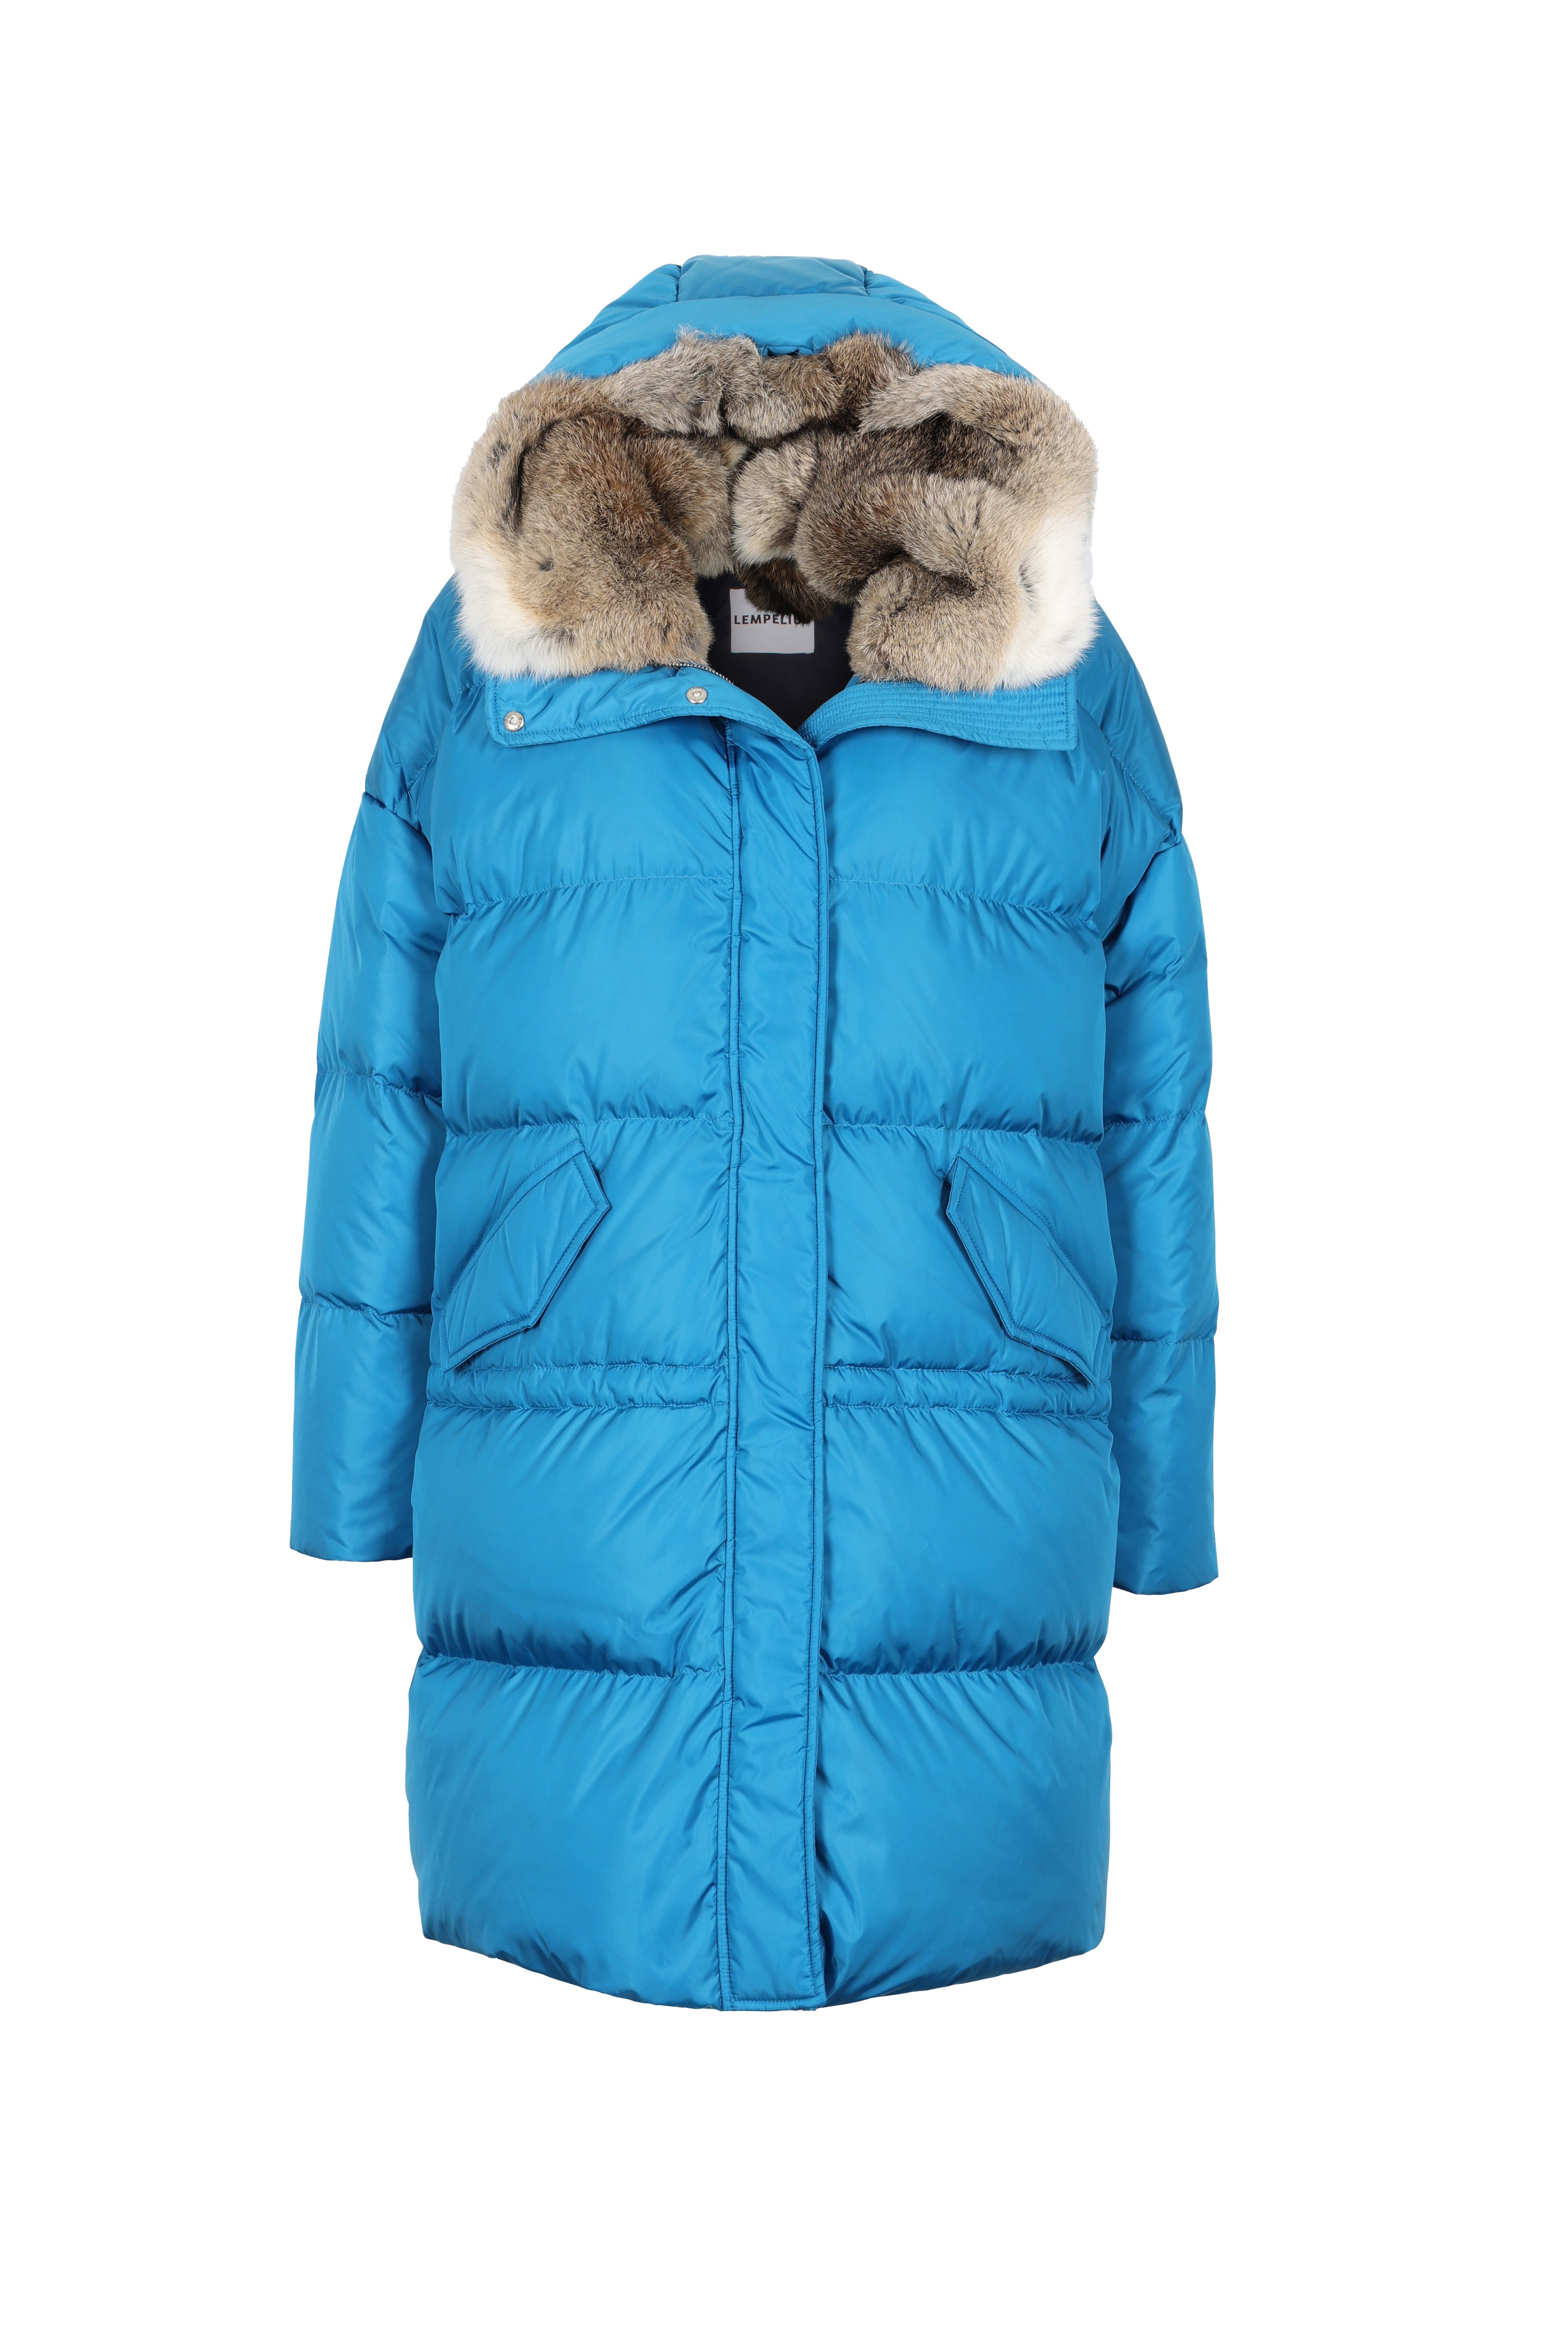 oversized Lempelius down parka in the color skyblue